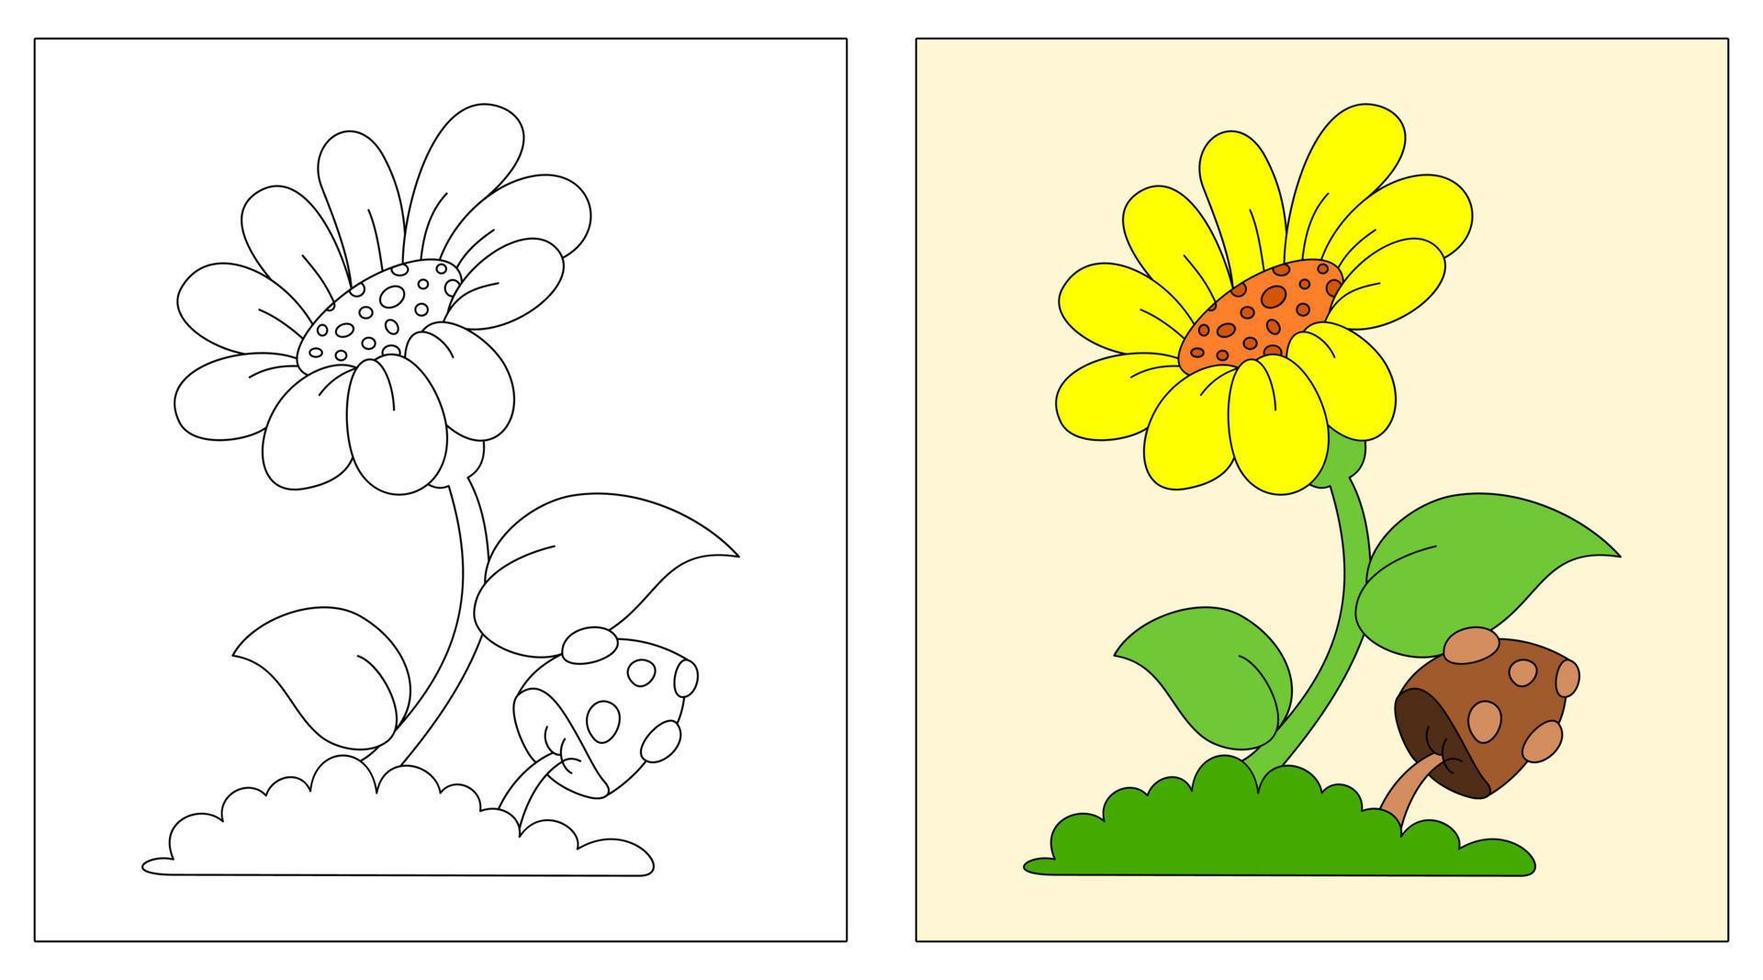 flowers and mushrooms coloring book or page, education for kids, vector illustration.